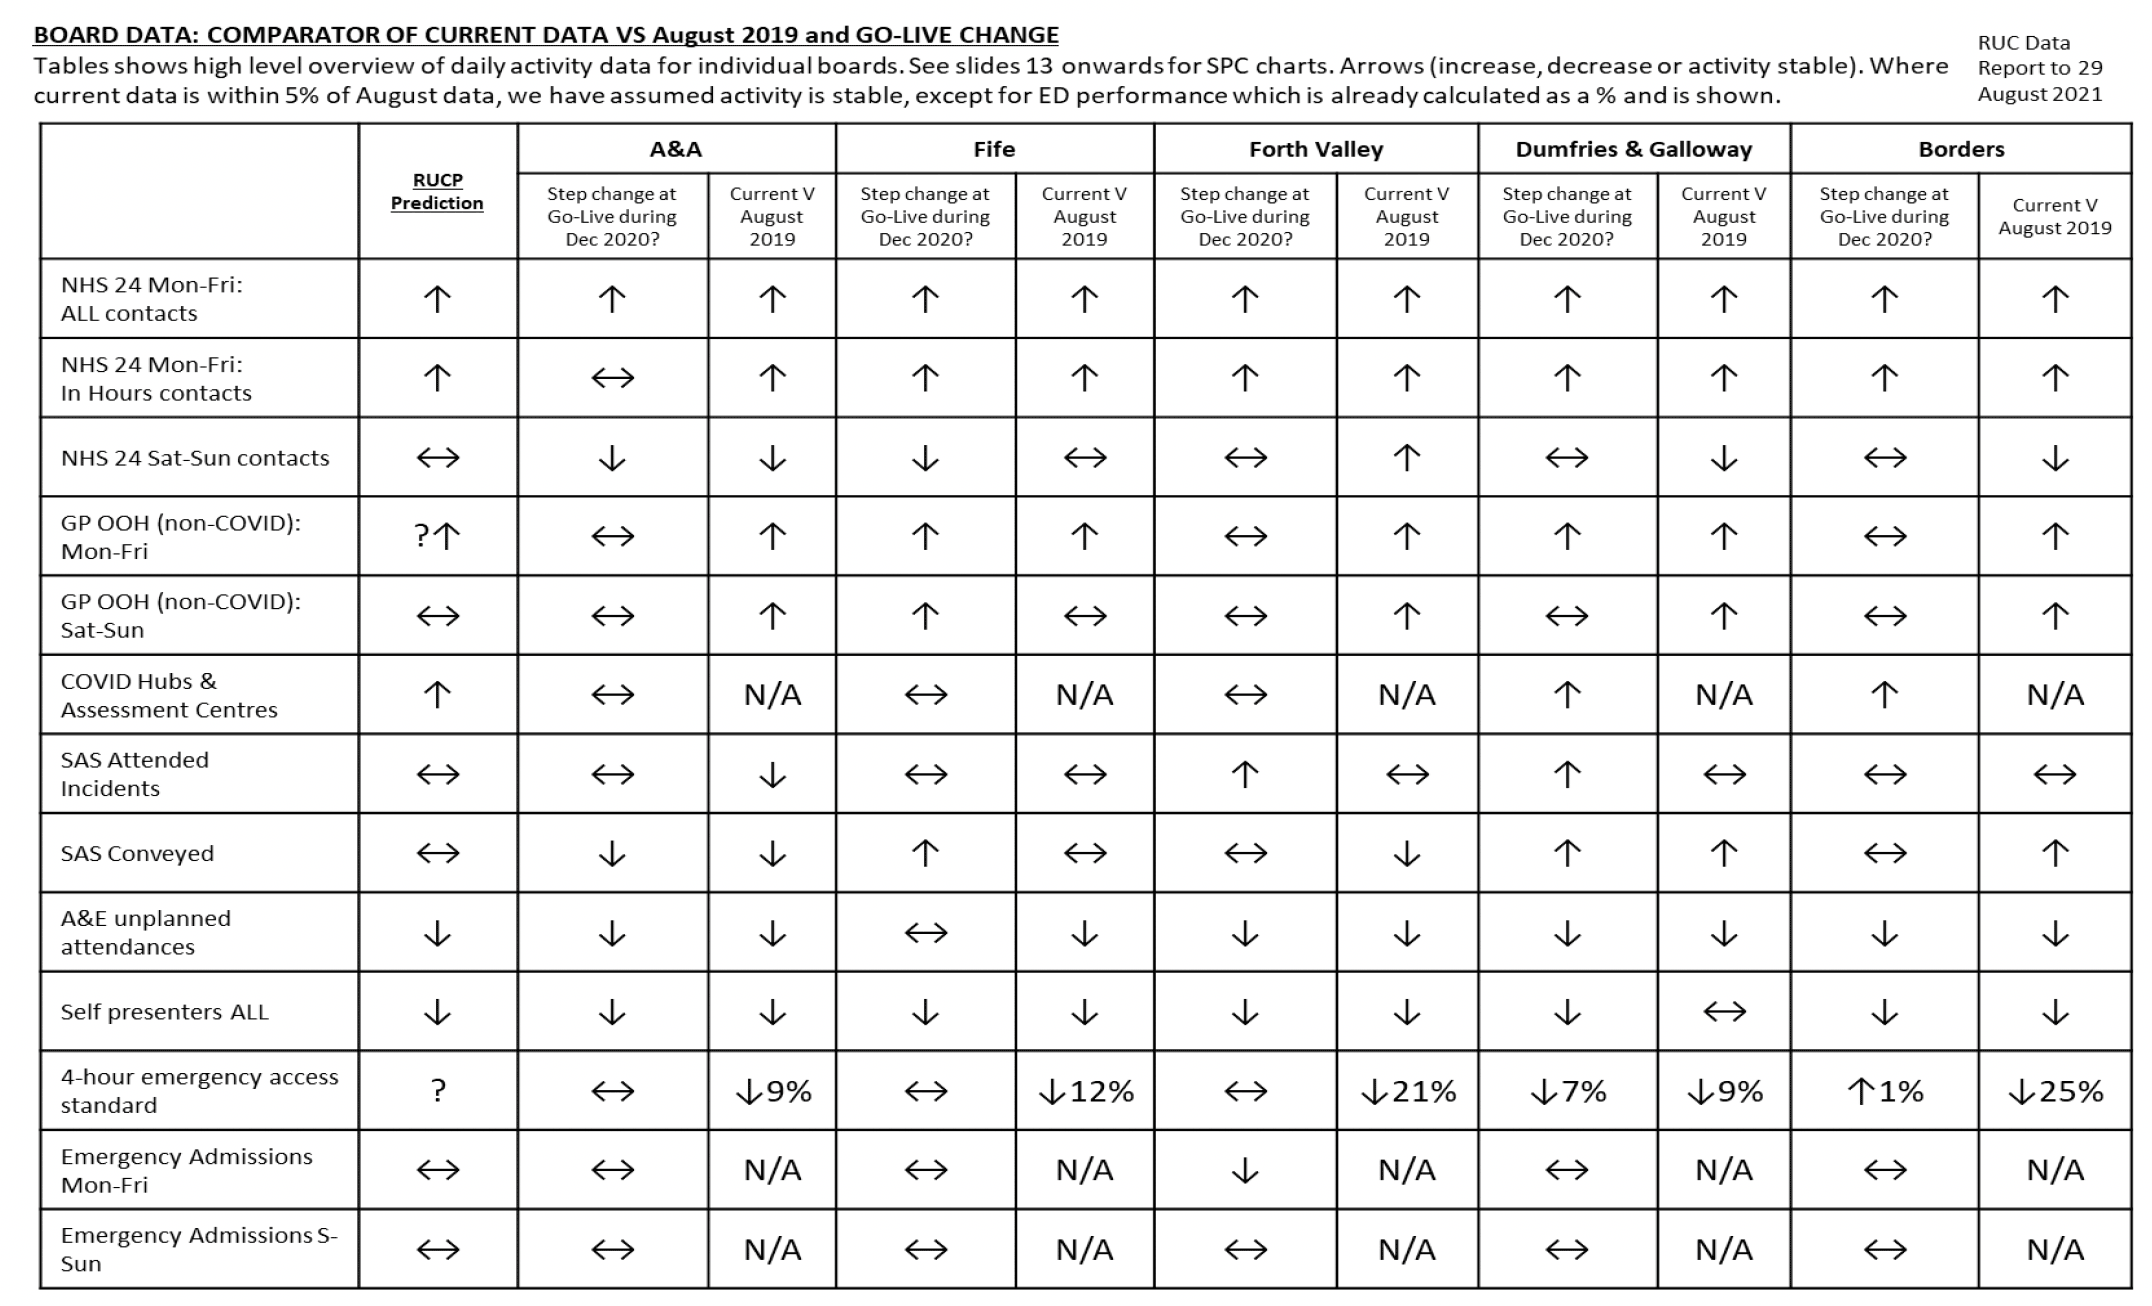 This table shows high level overview of daily activity data by board for NHS Lothian, NHS Greater Glasgow and Clyde, NHS Lanarkshire, NHS Tayside and NHS Grampian. For each board, the table shows if there was a step change at Go-Live of RUC programme during December 2020, as well as comparing current August 2021 data to August 2019 data. 